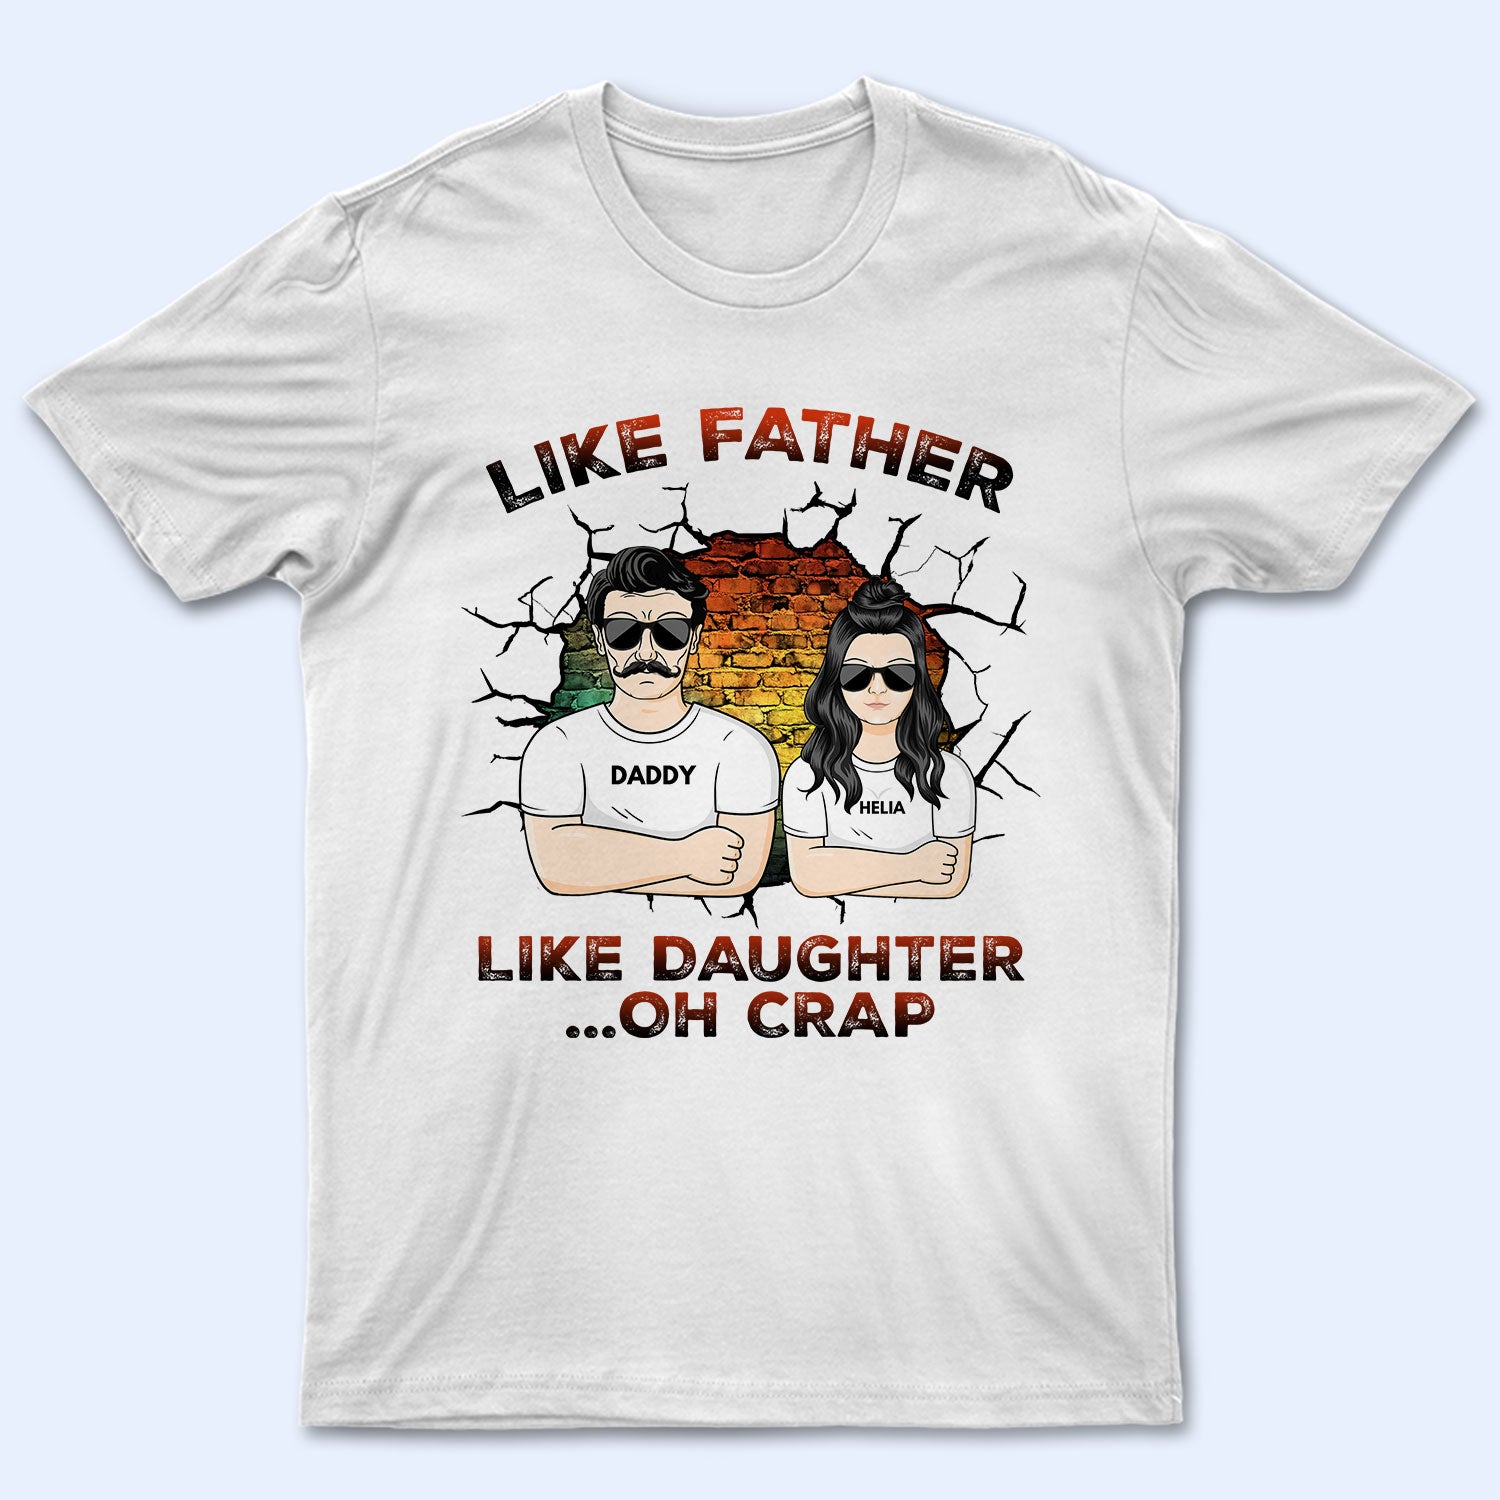 Like Father Like Daughter Oh Crap - Birthday, Funny Gift For Dad, Daddy, Grandpa, Husband, Daughters - Personalized Custom T Shirt